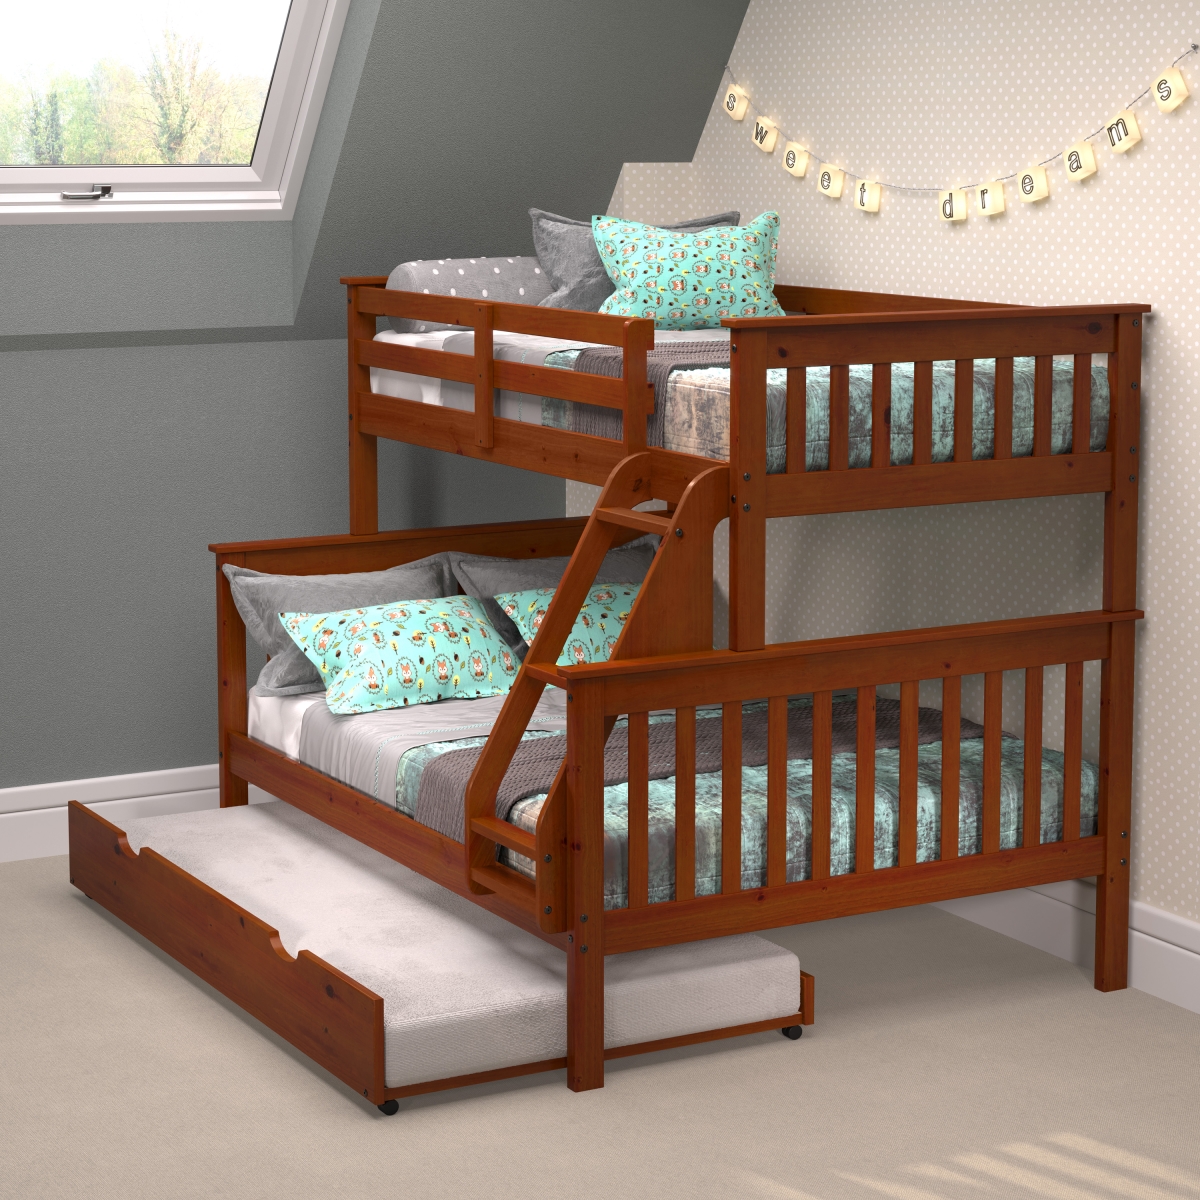 Picture of Donco Kids PD-122-3E-503 Twin Over Full Size Mission Bunk Bed with Twin Trundle - Espresso